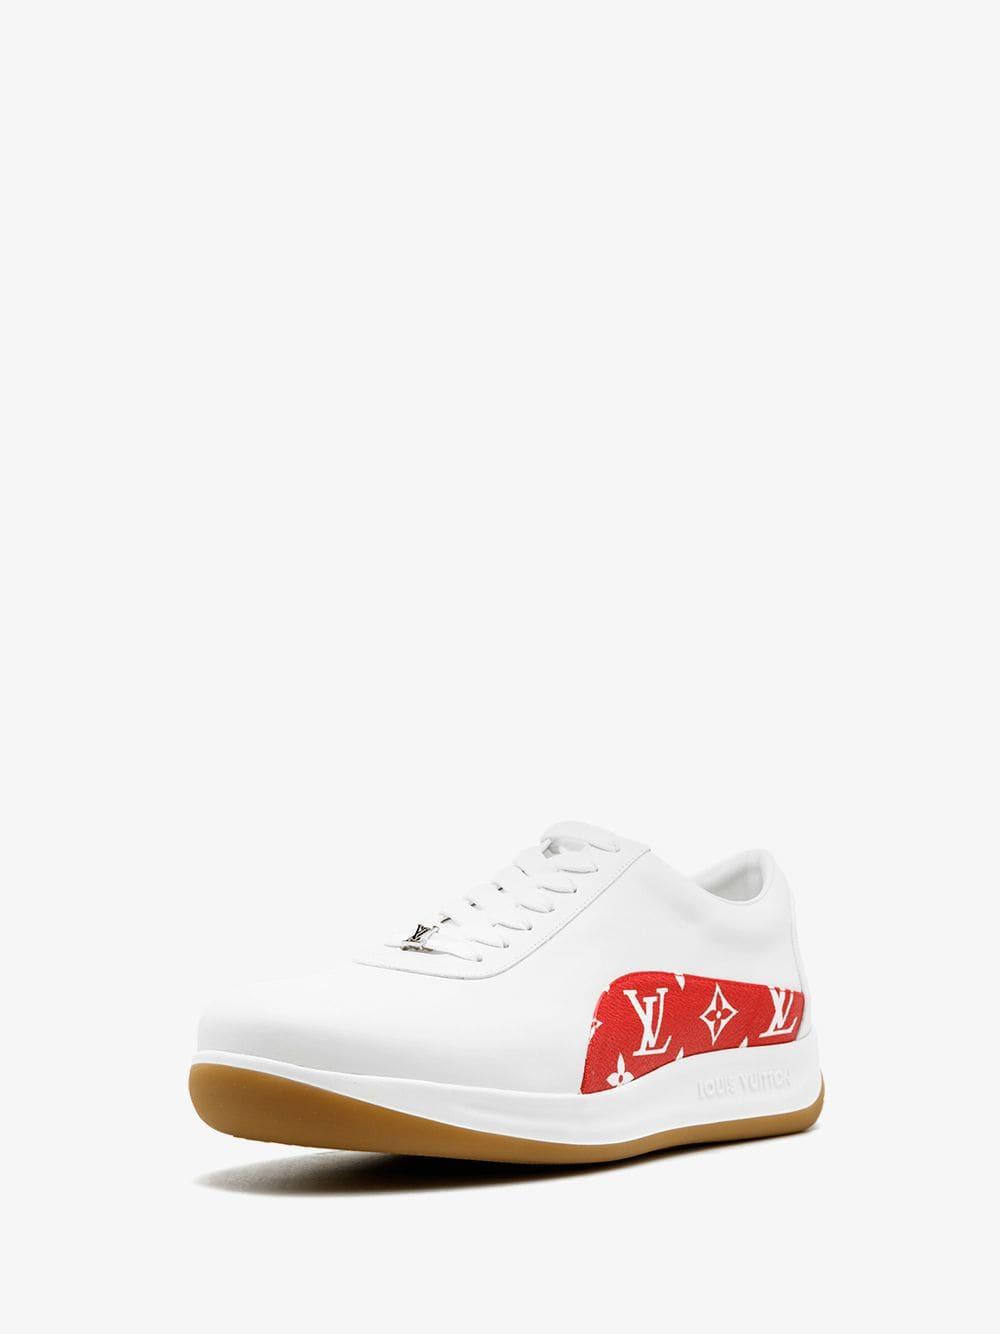 Stadium Goods Leather Louis Vuitton X Supreme Sport Sneakers in White for Men - Lyst